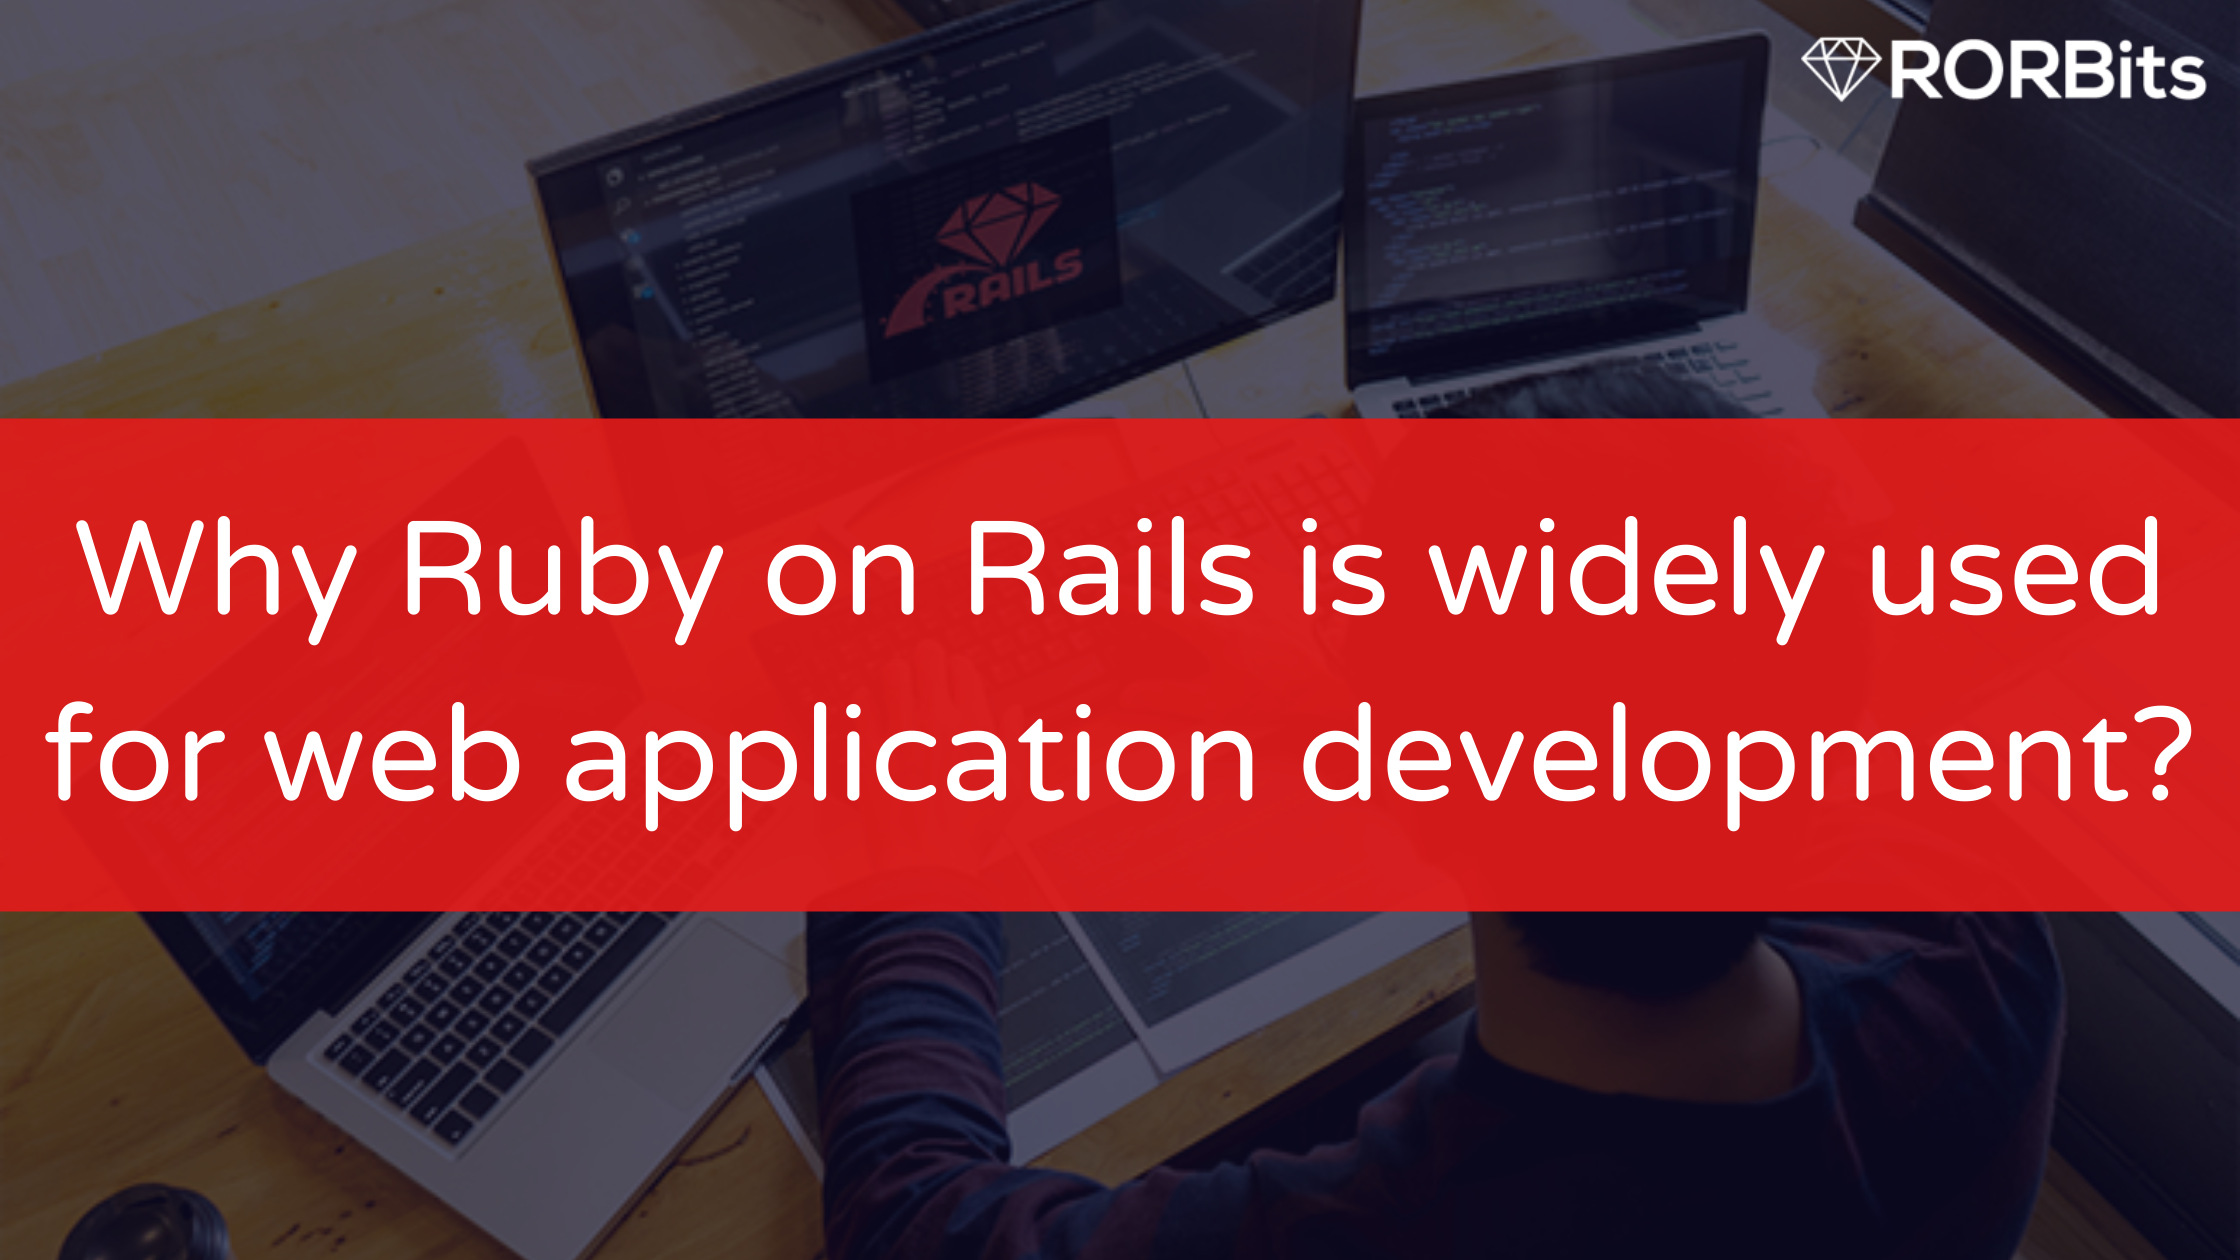 Why Ruby on Rails is widely used for web application development?